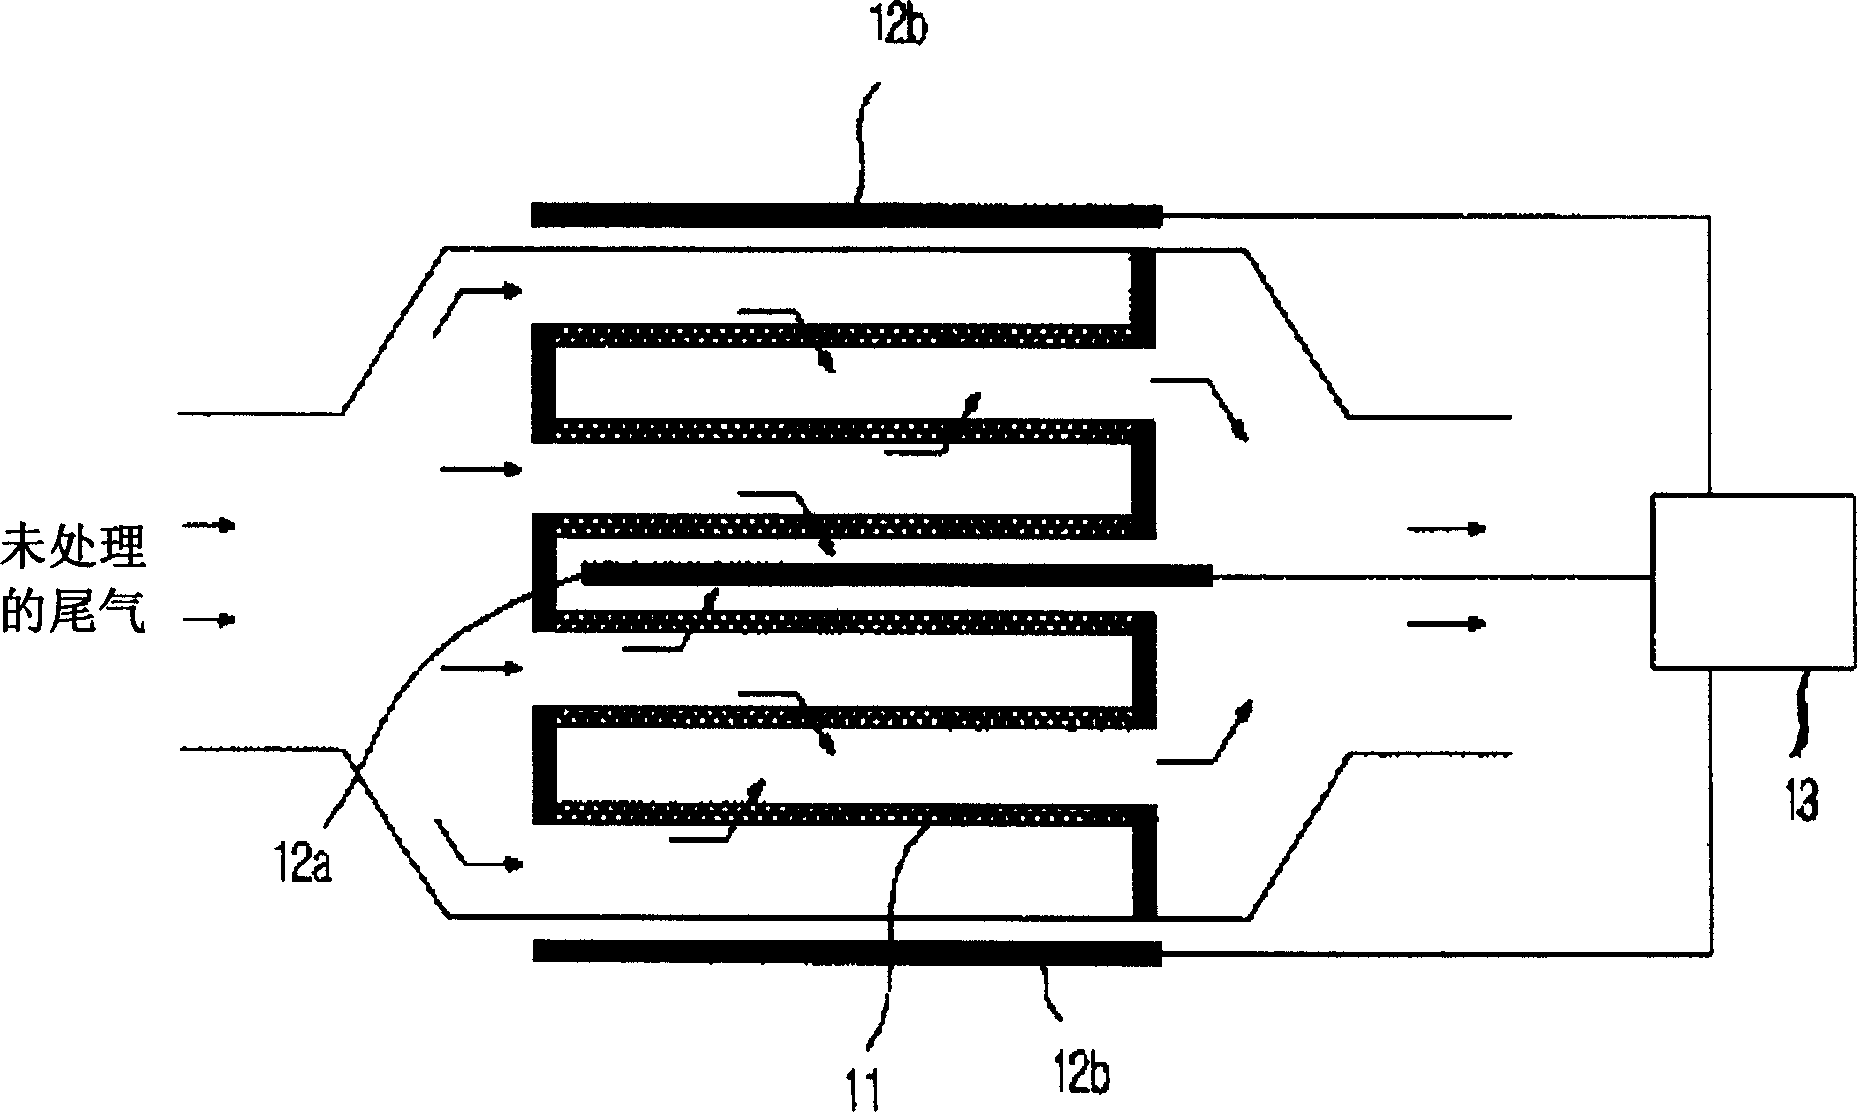 Apparatus for removing soot and NOx in exhaust gas from diesel engines